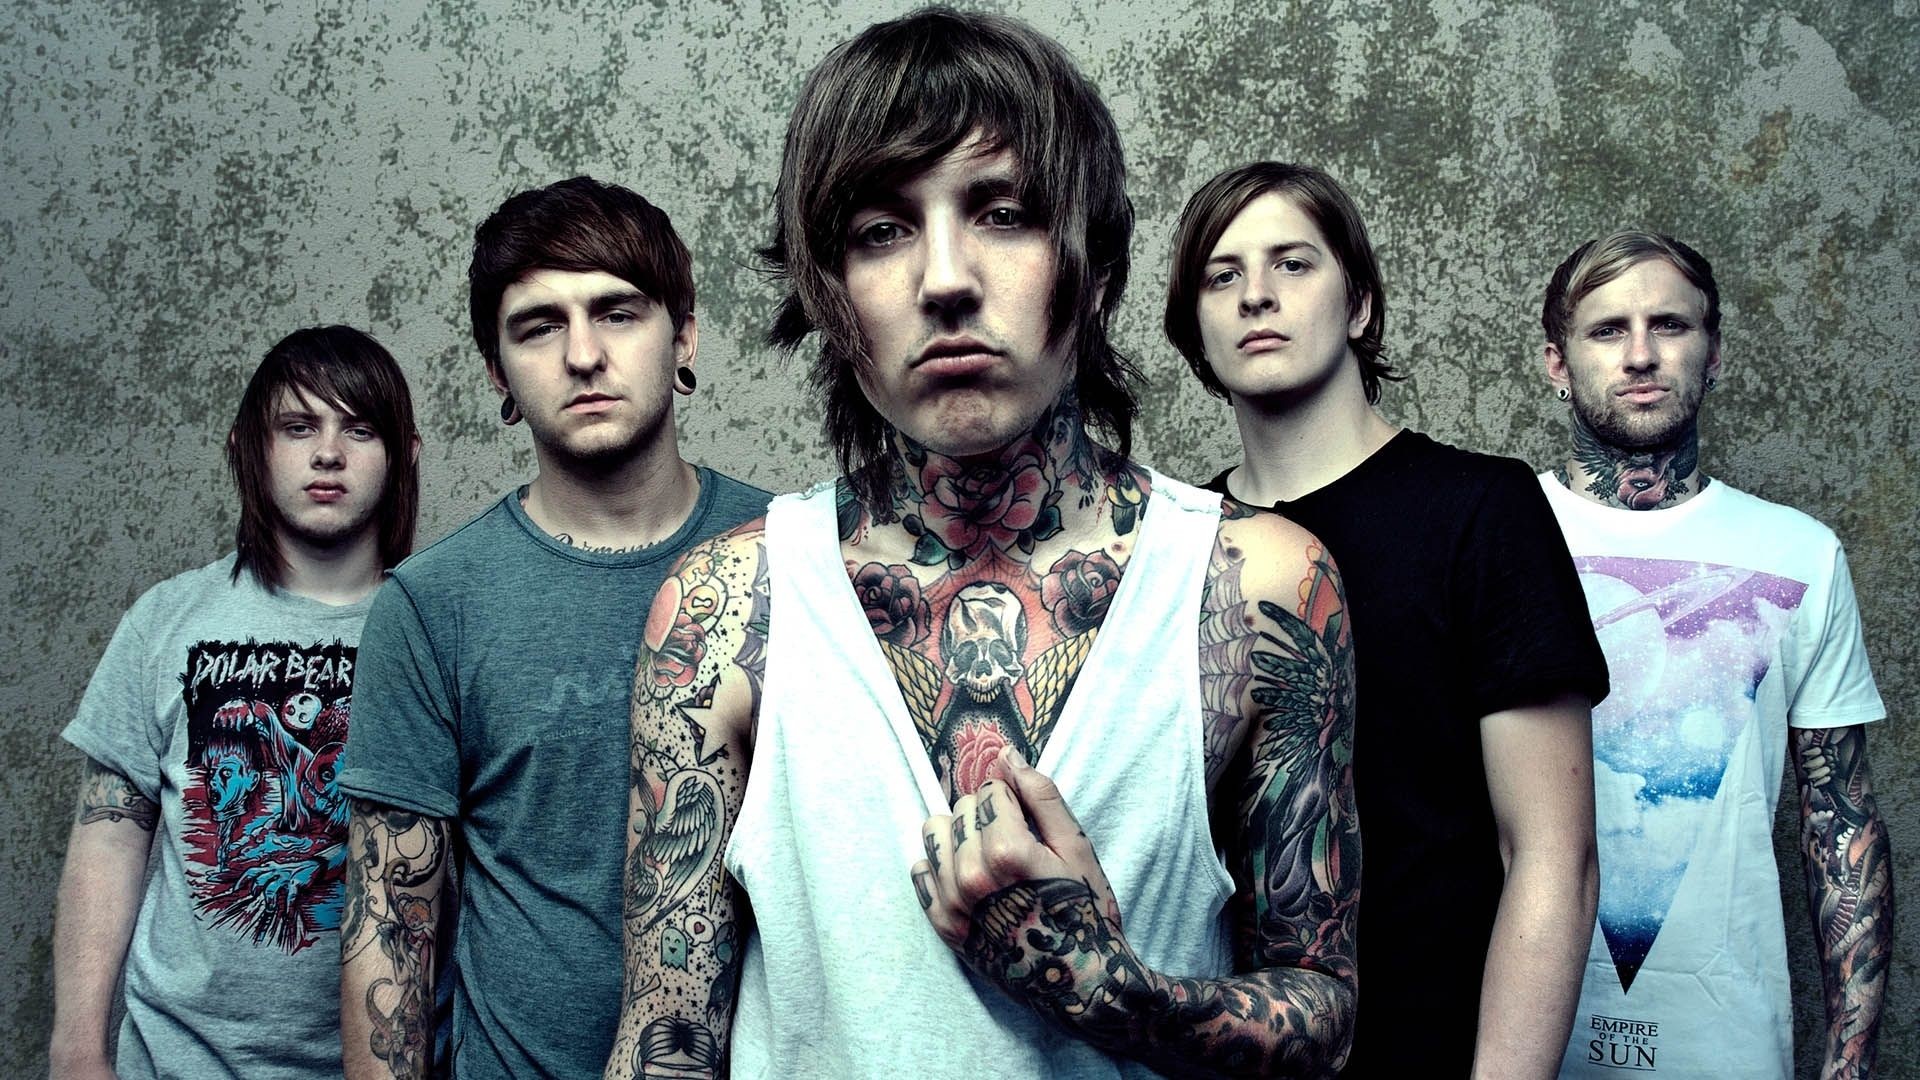 1920x1080 ... wallpaper Photo In High Quality | Oli Sykes by Emely Humphris